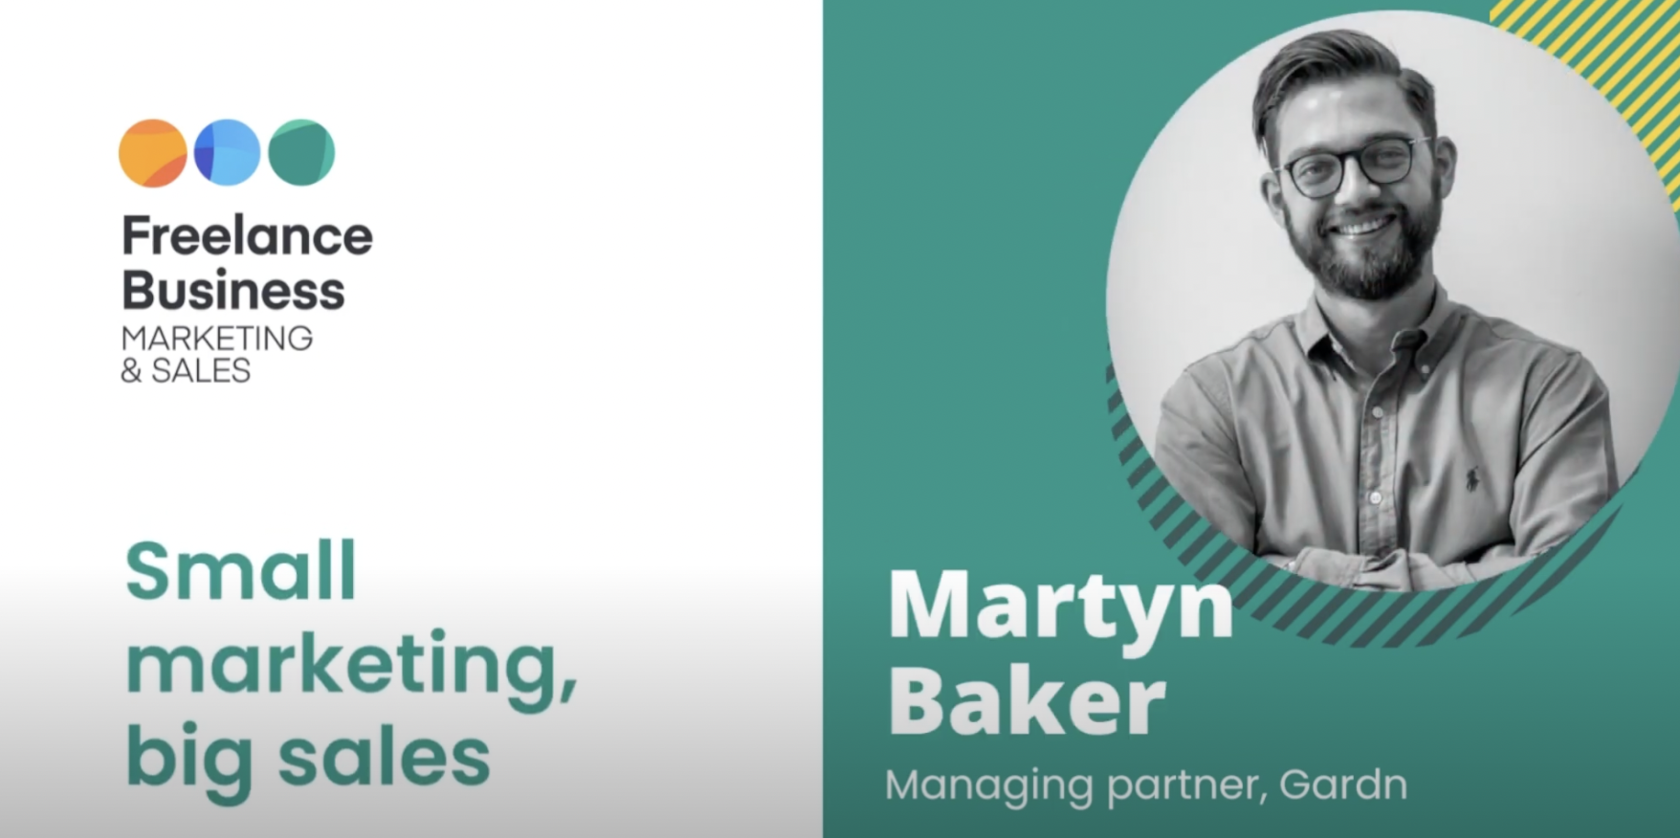 Small marketing, big sales for freelance entrepreneurs with Martyn Baker